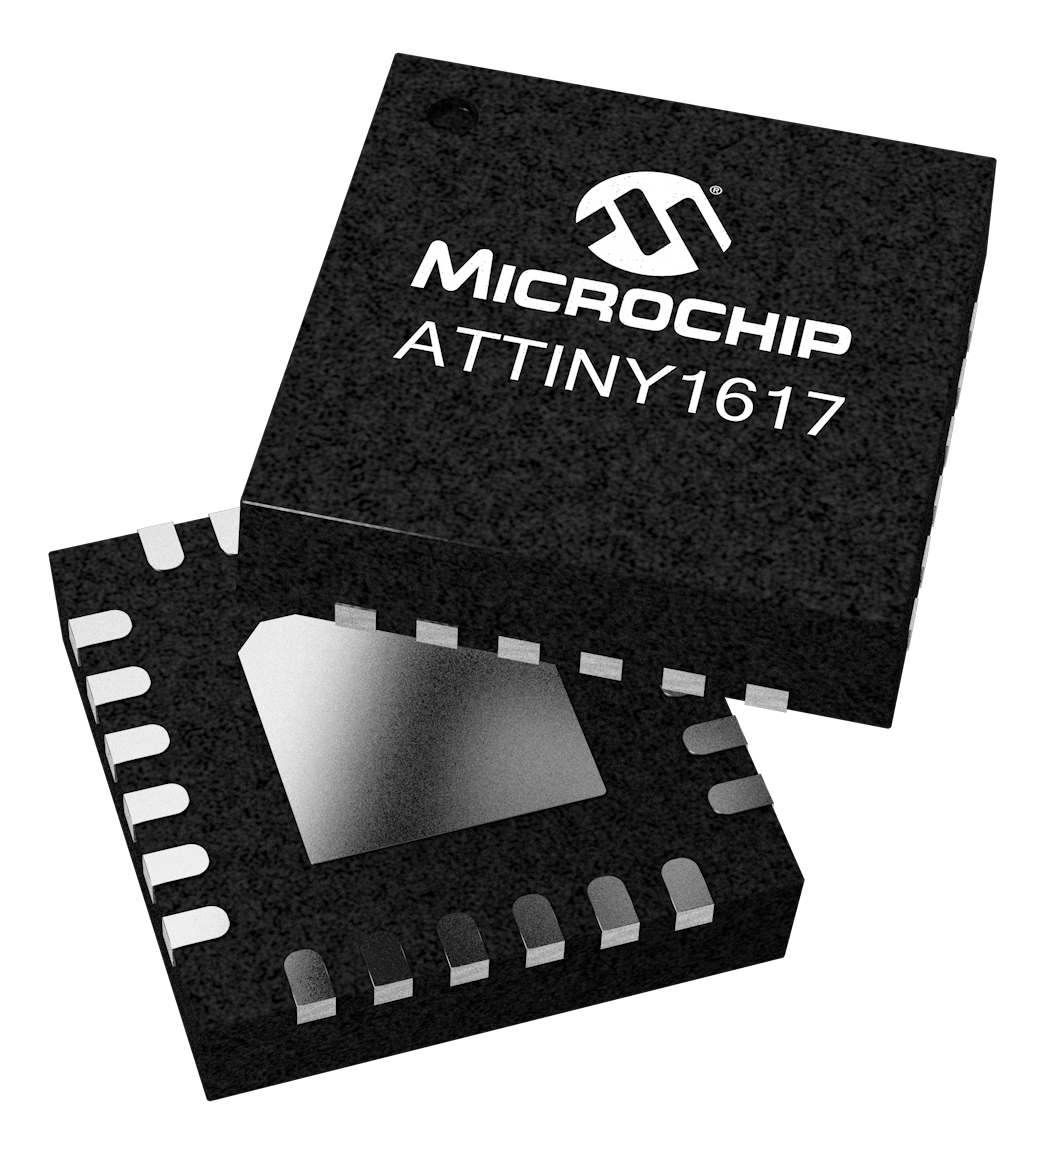 Microchip tiny1617 Product Family